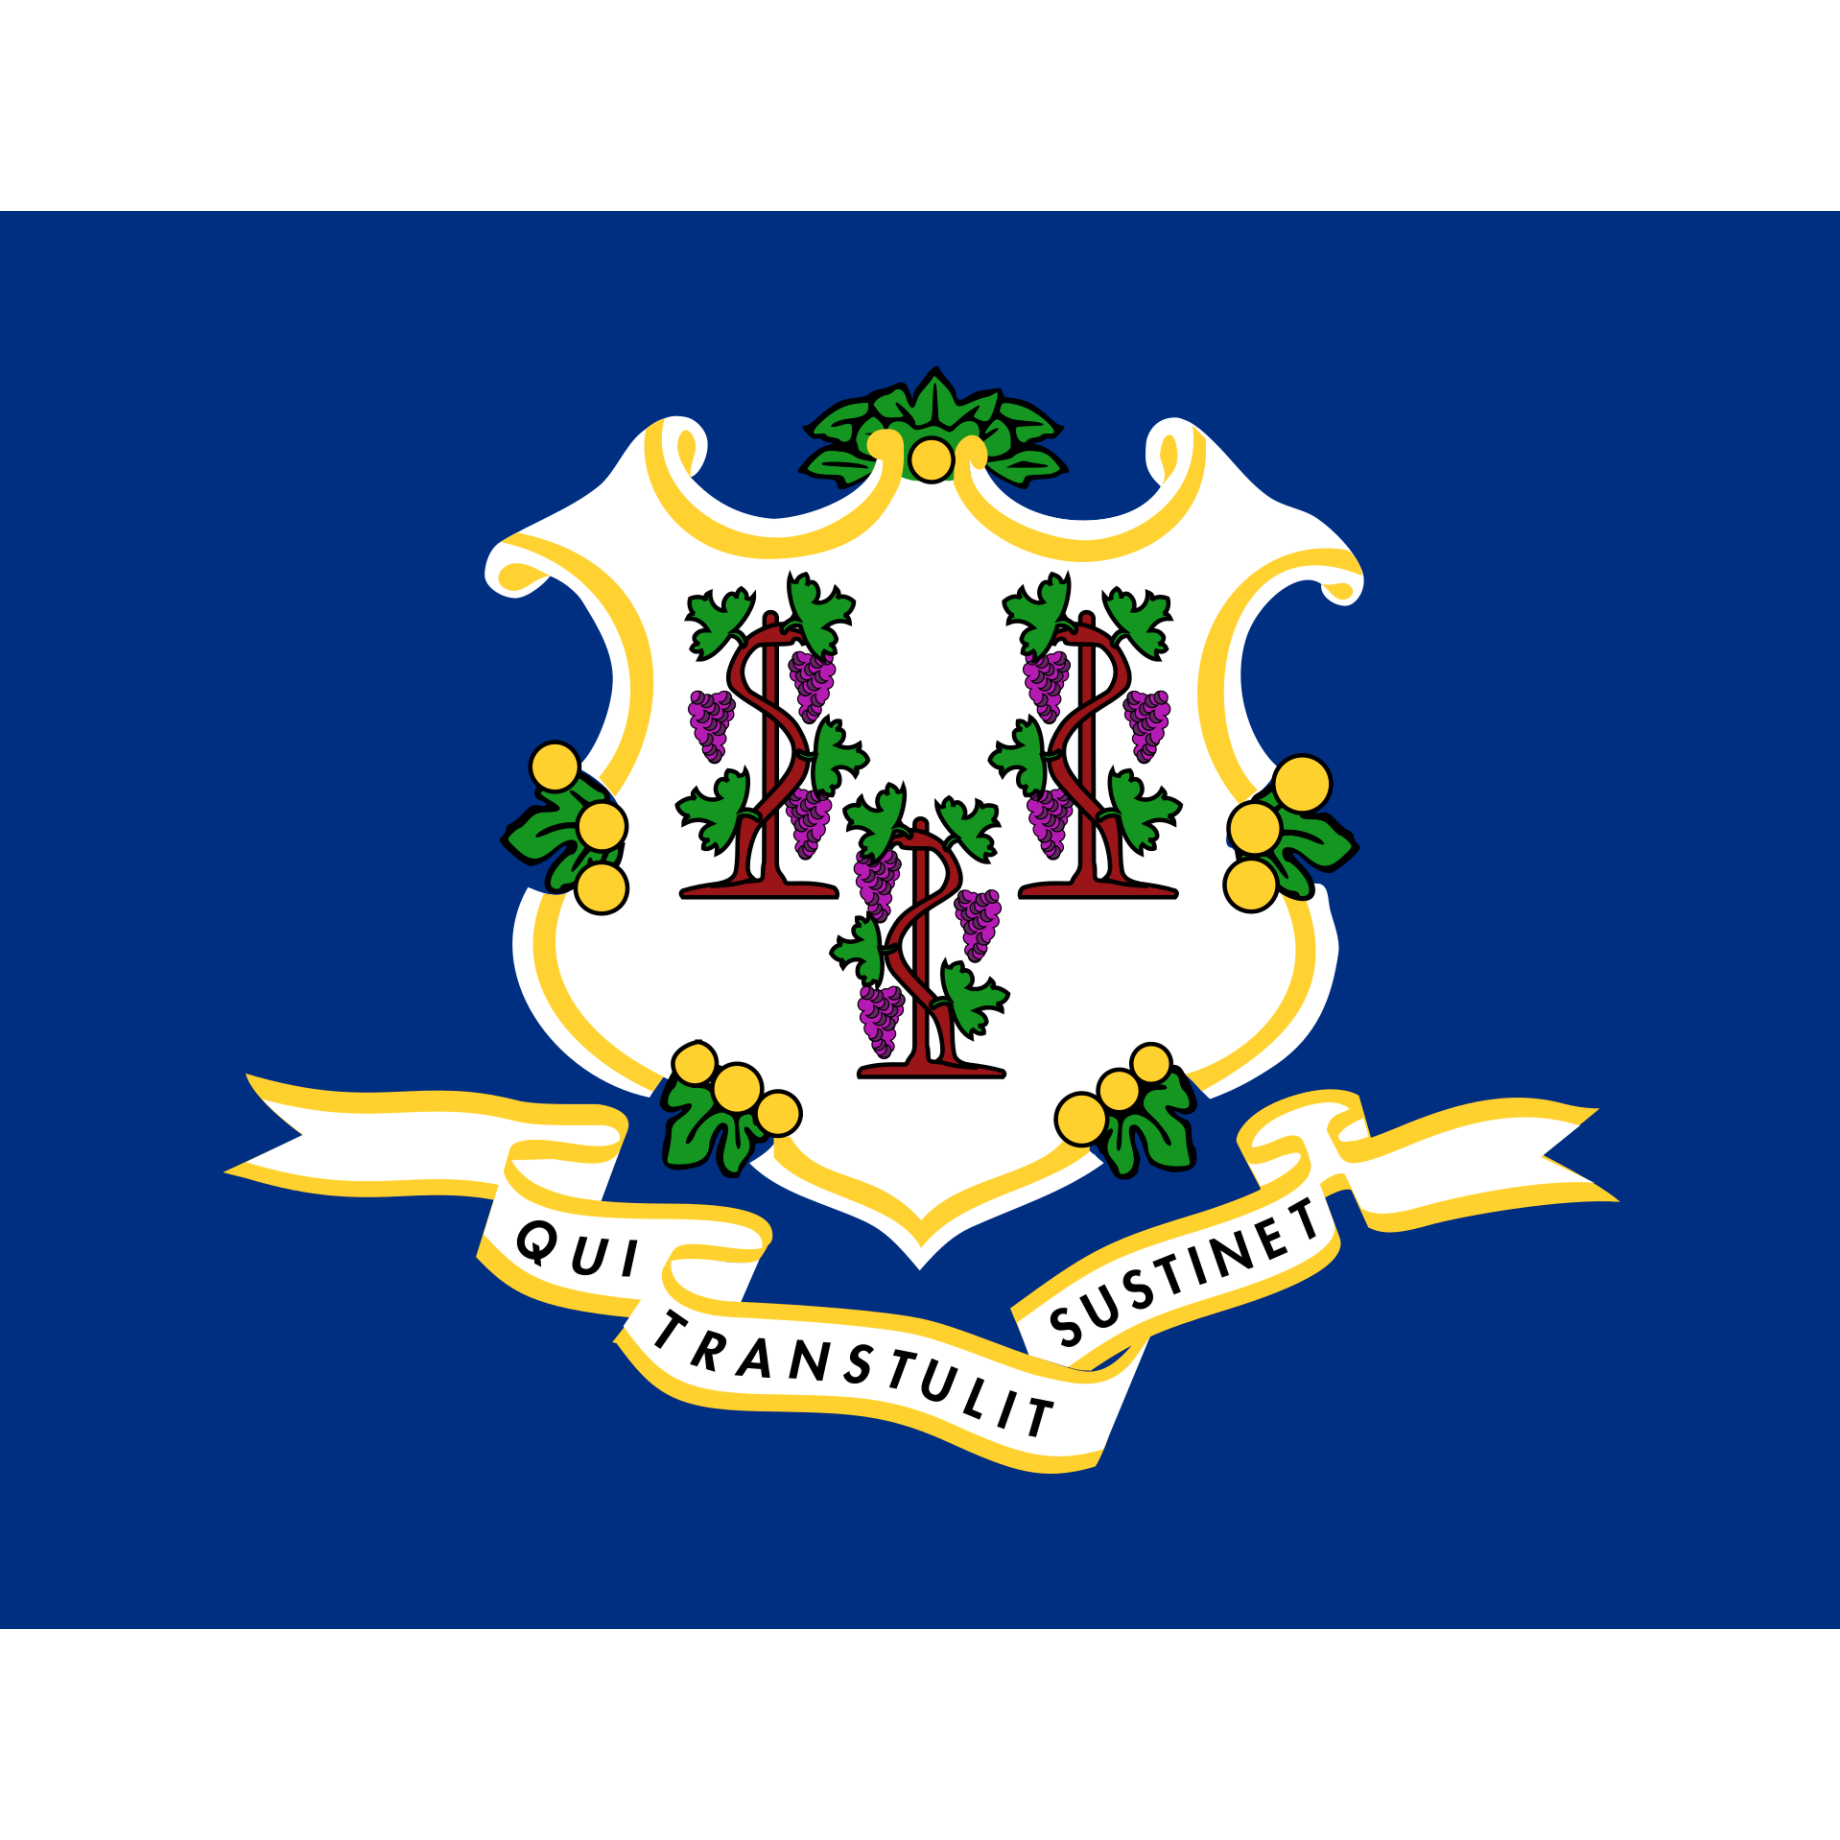 Flag of Connecticut